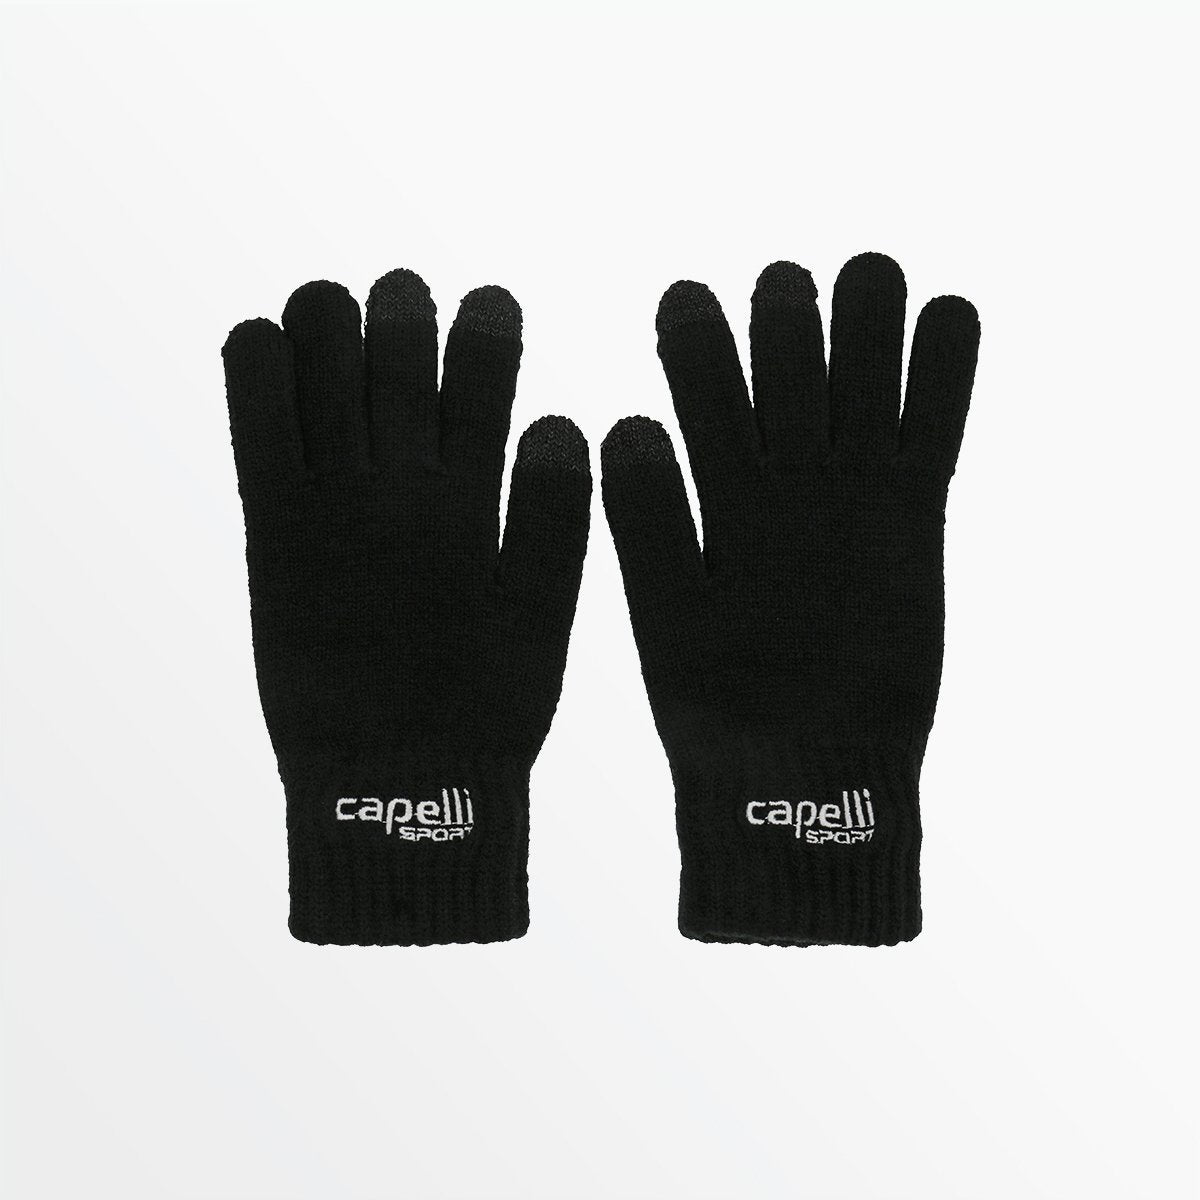 YOUTH BRANDED KNIT GLOVE WITH 3 FINGER TOUCH